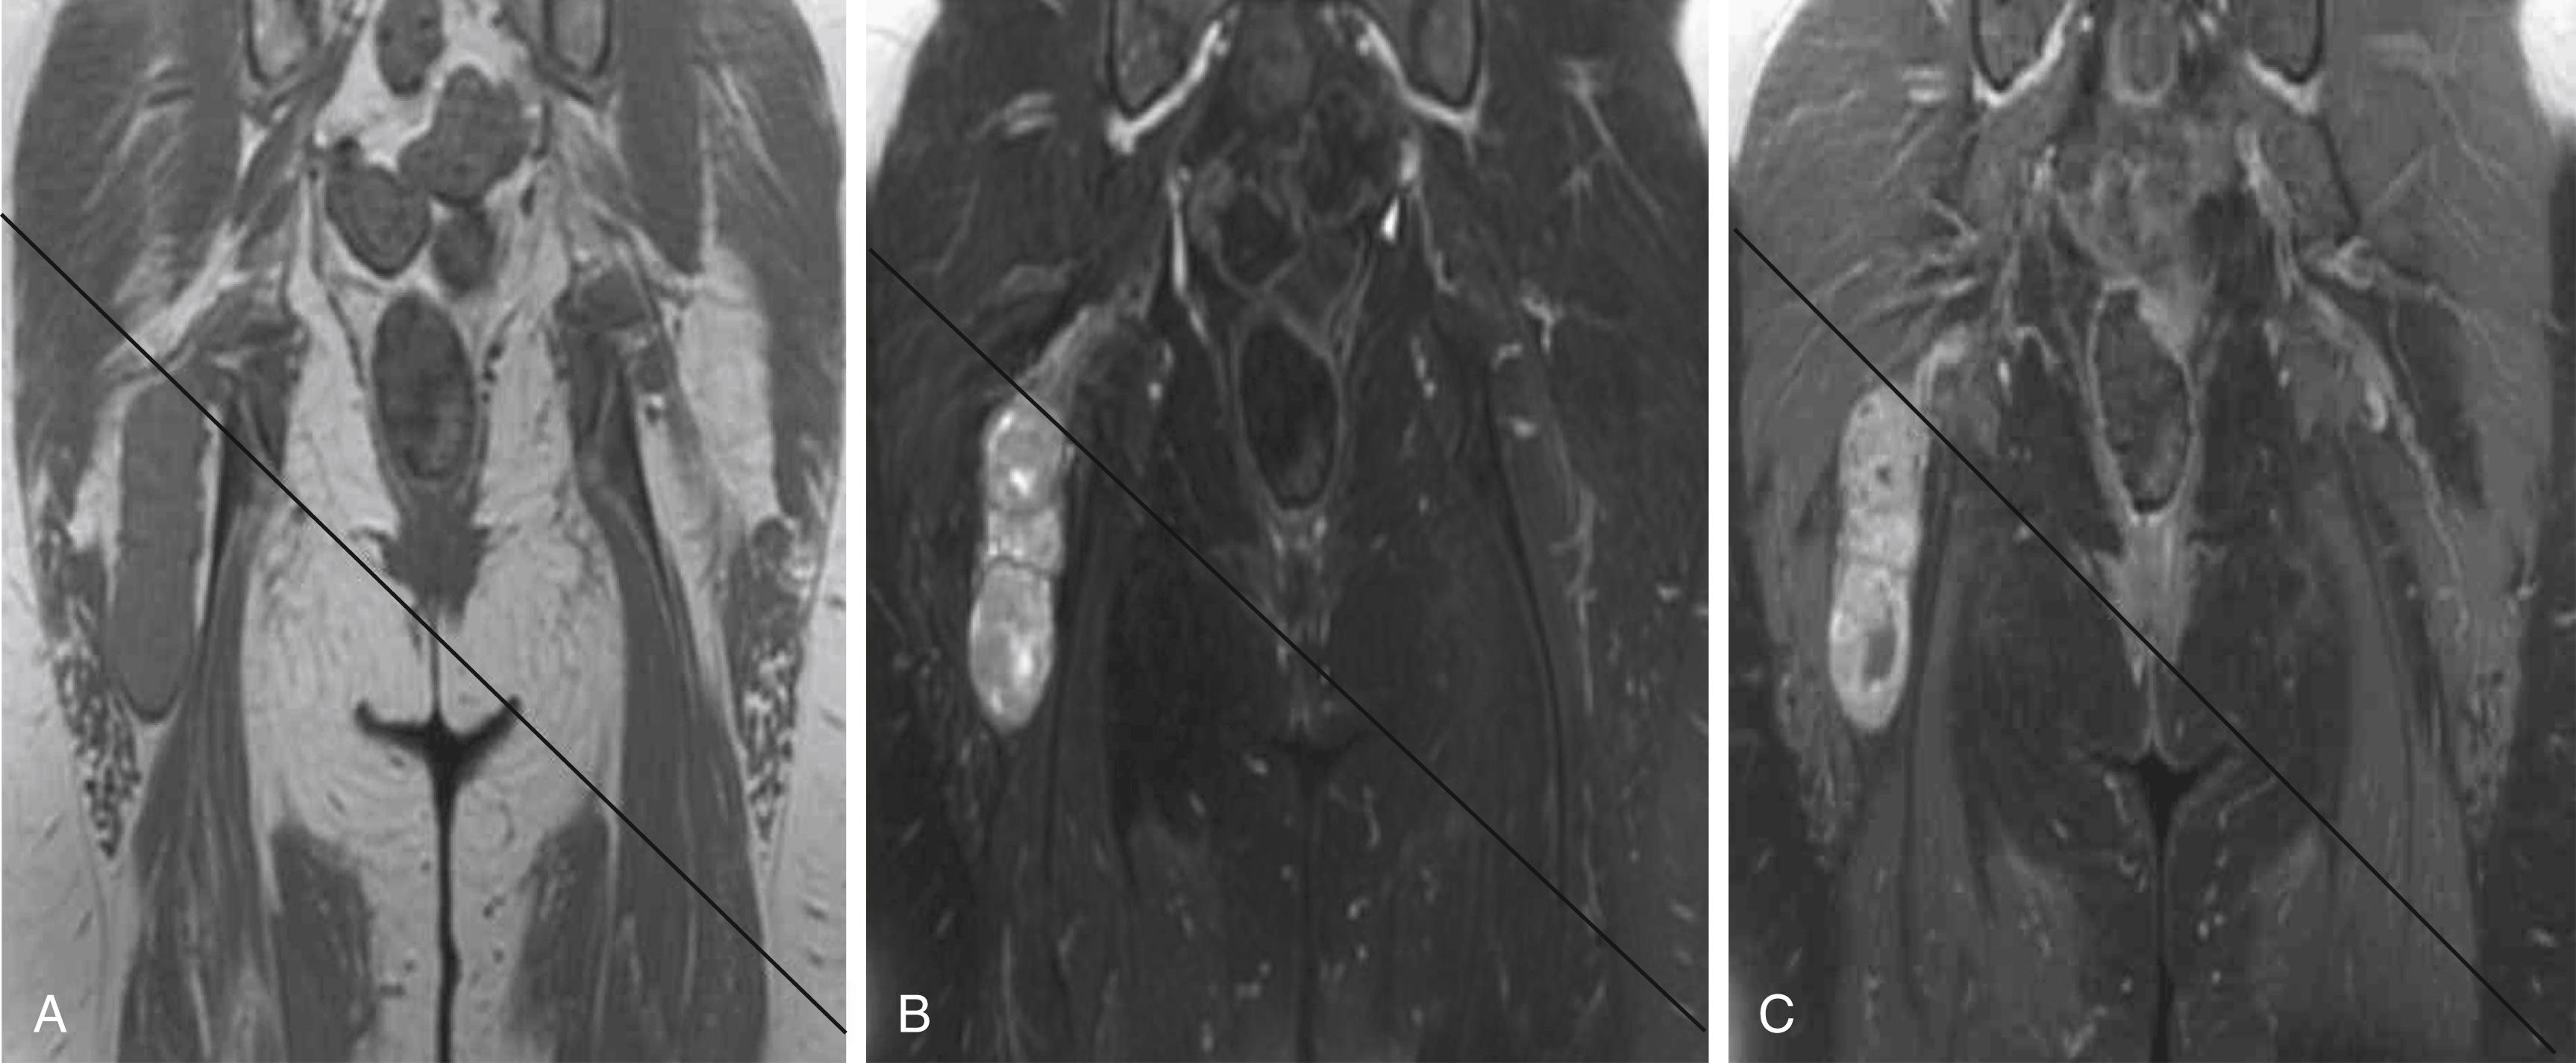 Fig. 190.1, Magnetic resonance image (MRI) of a sciatic nerve schwannoma. Coronal MRI demonstrates a well-circumscribed tumor involving the right sciatic nerve that is (A) isointense to muscle on T1, (B) hyperintense on T2, and (C) enhancing after gadolinium administration. Note small areas of cystic necrosis.